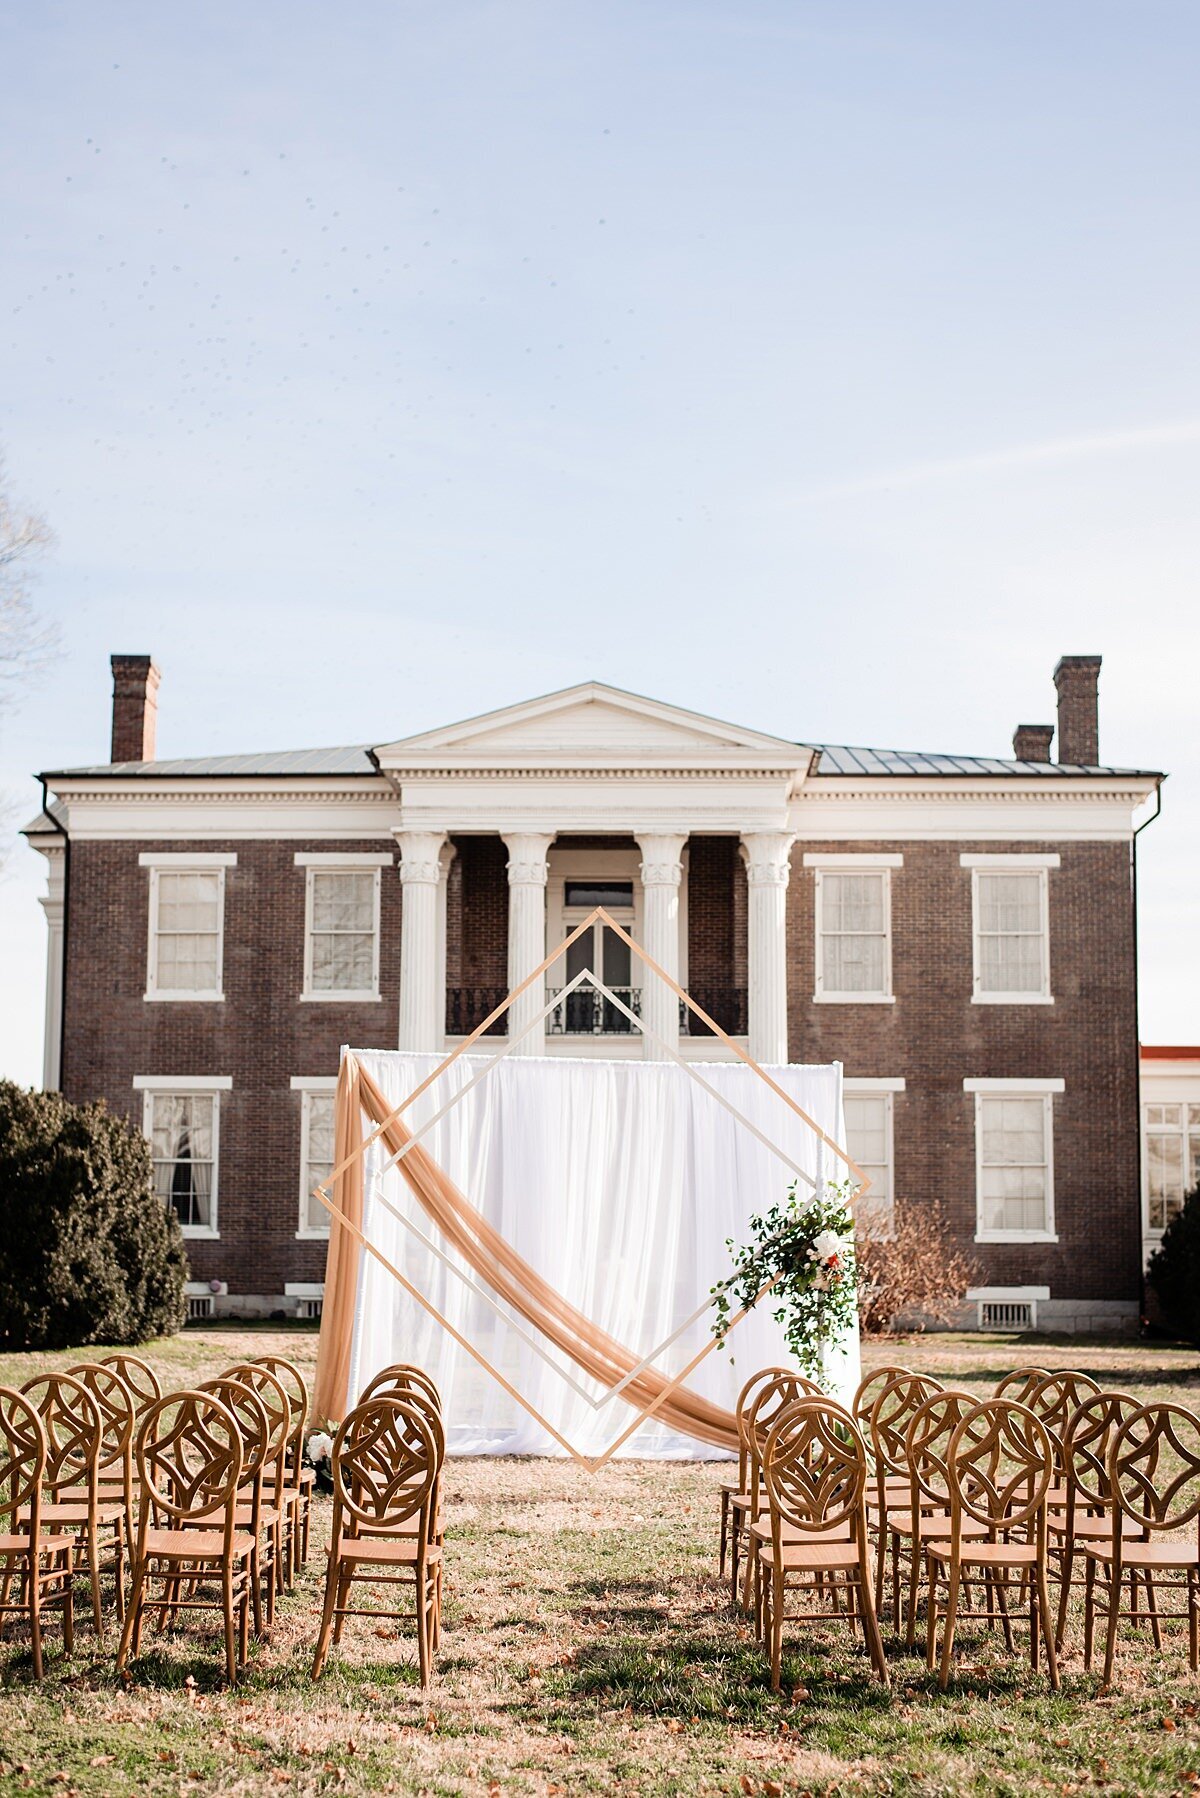 Art deco ceremony arbor with drapery and wood banquet chairs set on the front lawn in front of Rippa Villa mansion